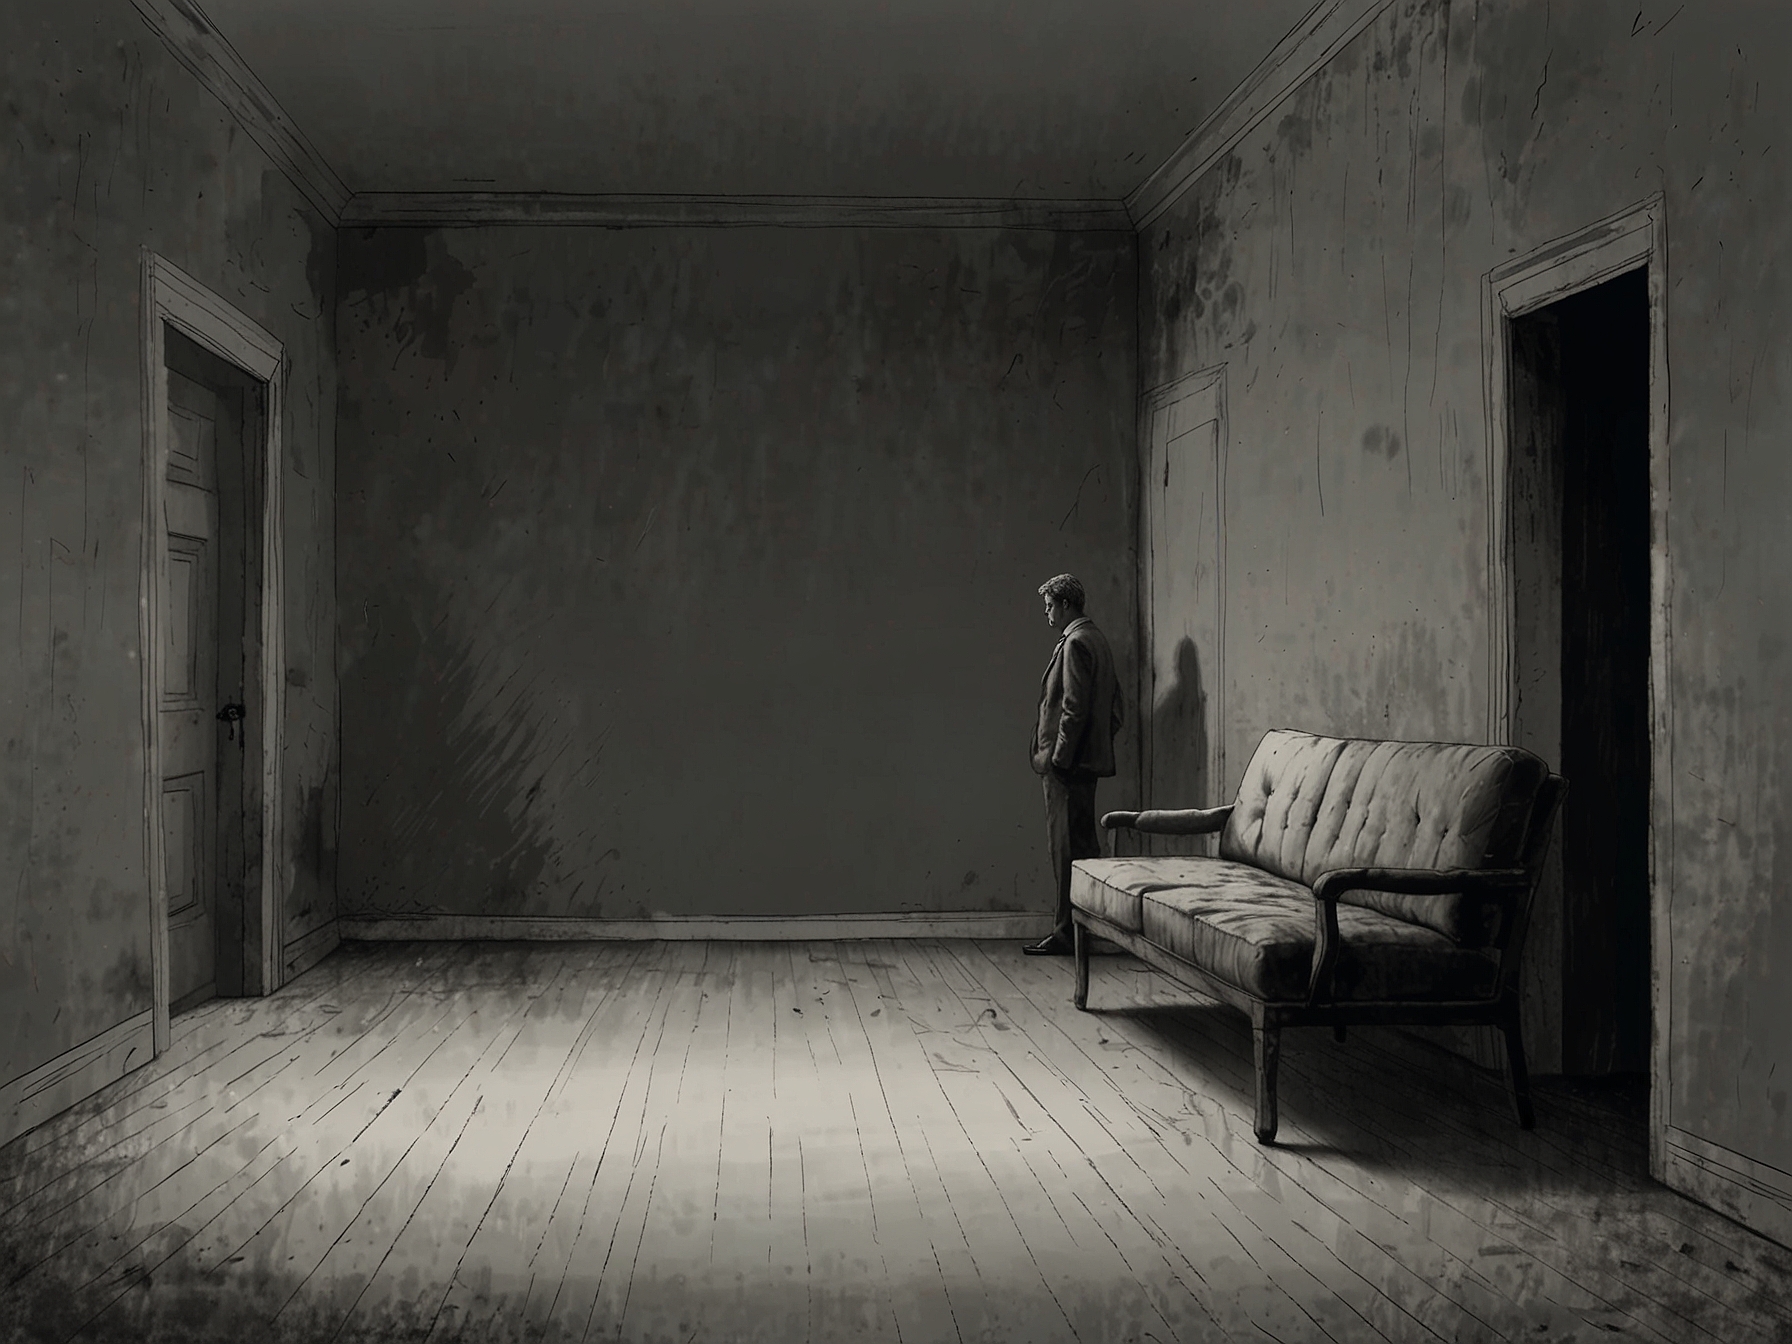 An image showing a person isolated in a grey room, symbolizing how arrogance can lead to loneliness and disconnection from meaningful relationships.